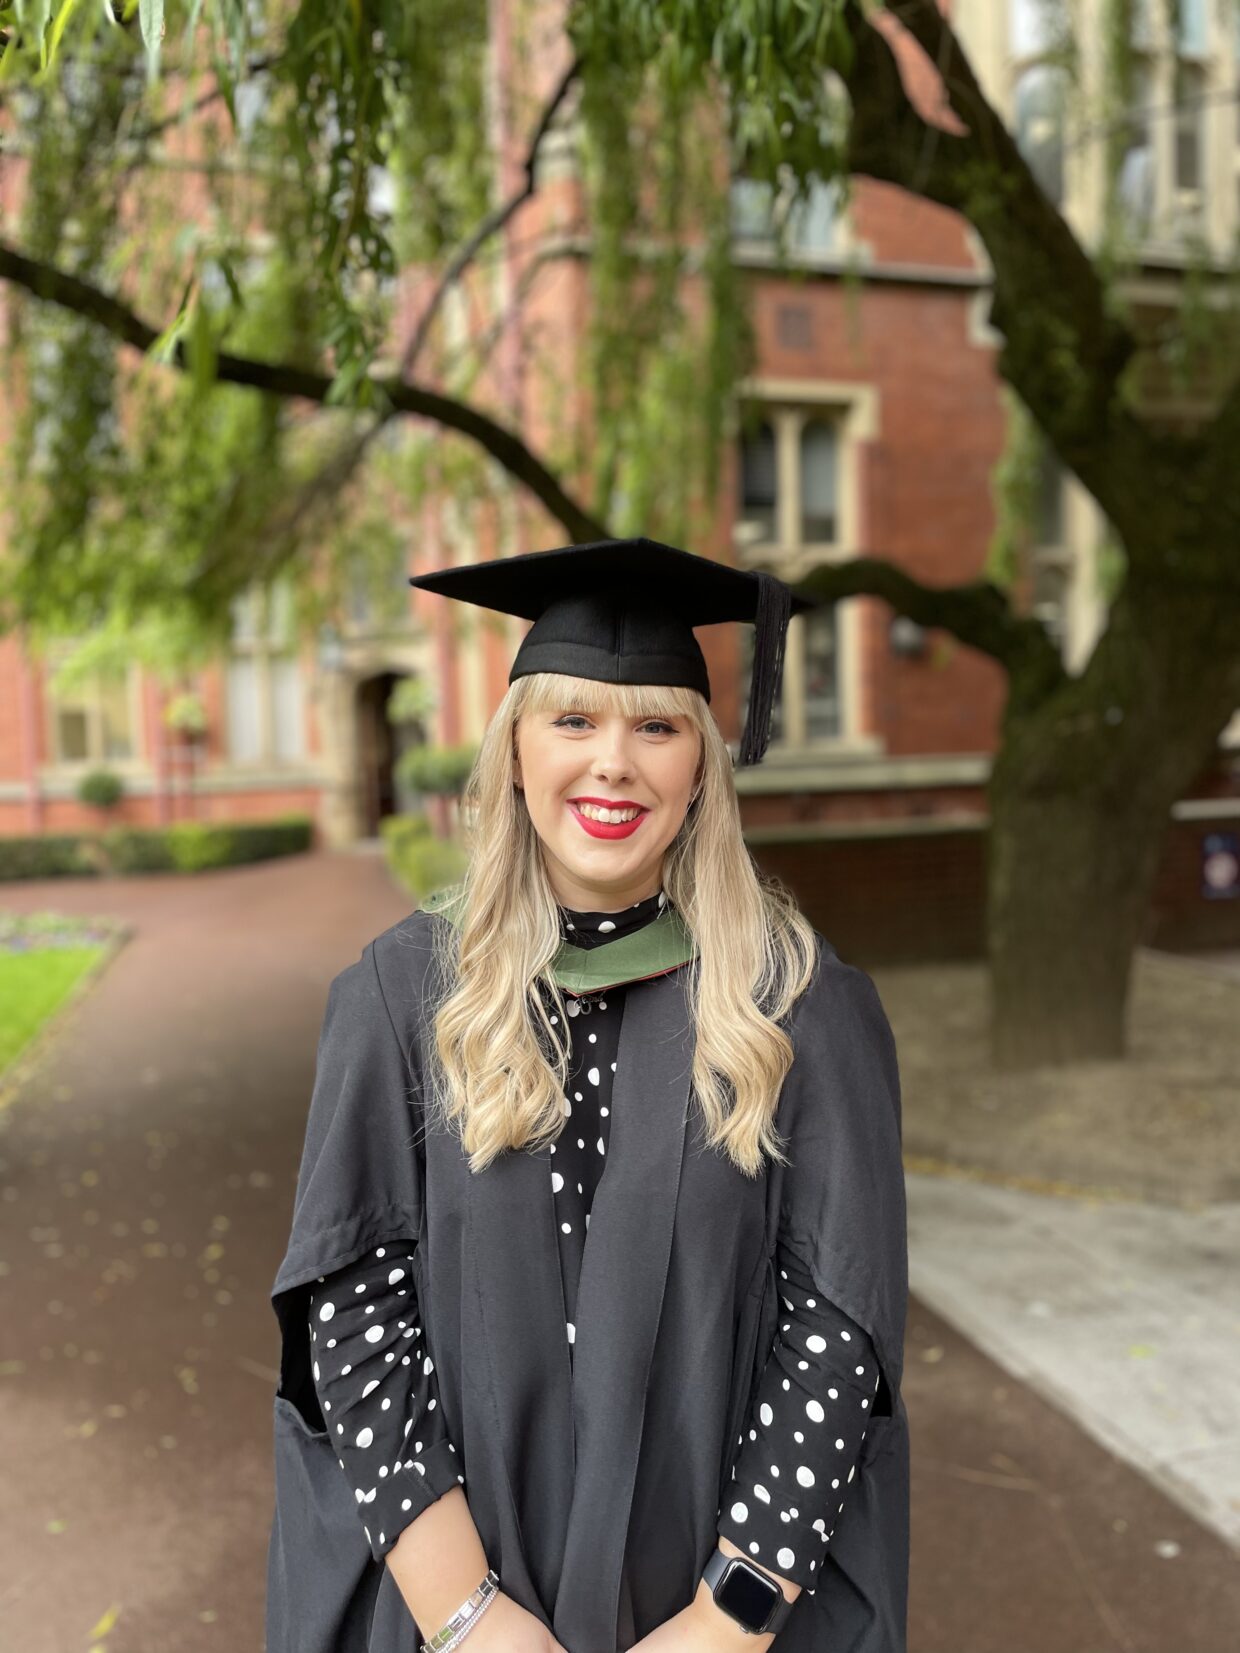 Jenna has long blonde hair and is smiling at the camera. She is wearing a graduation cap and gown during her Master's graduation at the University of Sheffield